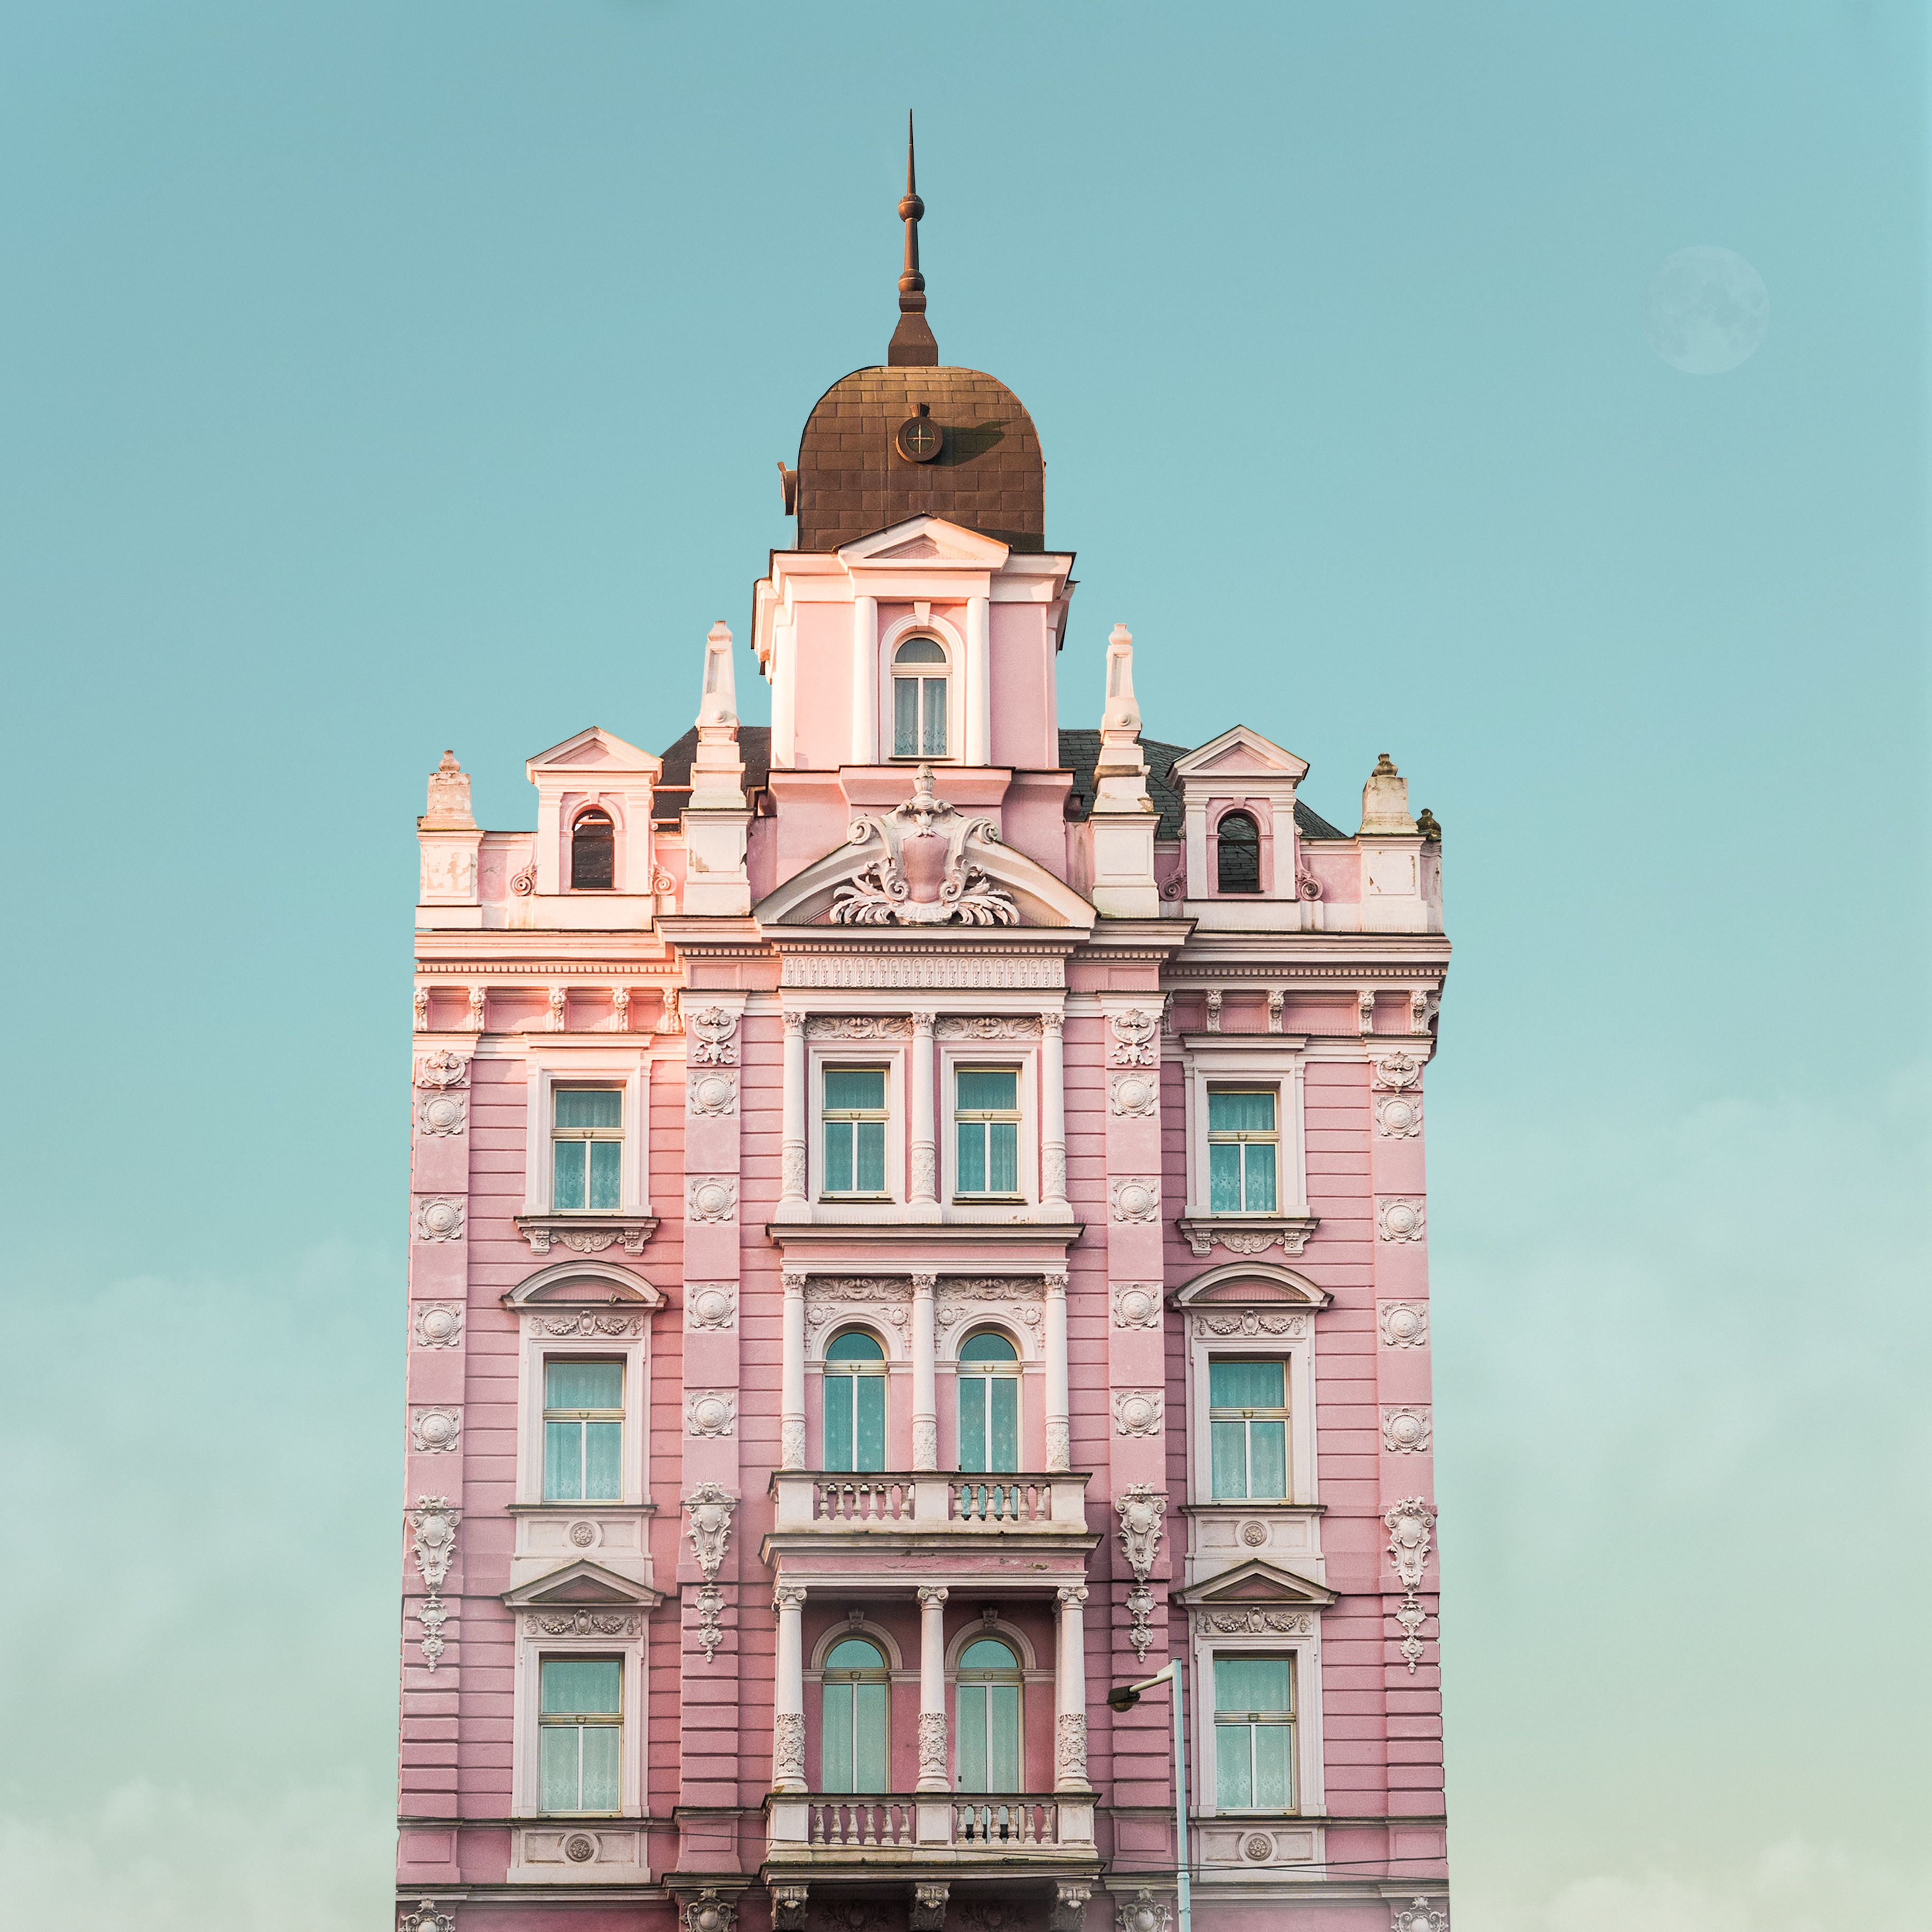 A n z u: Wes Anderson style